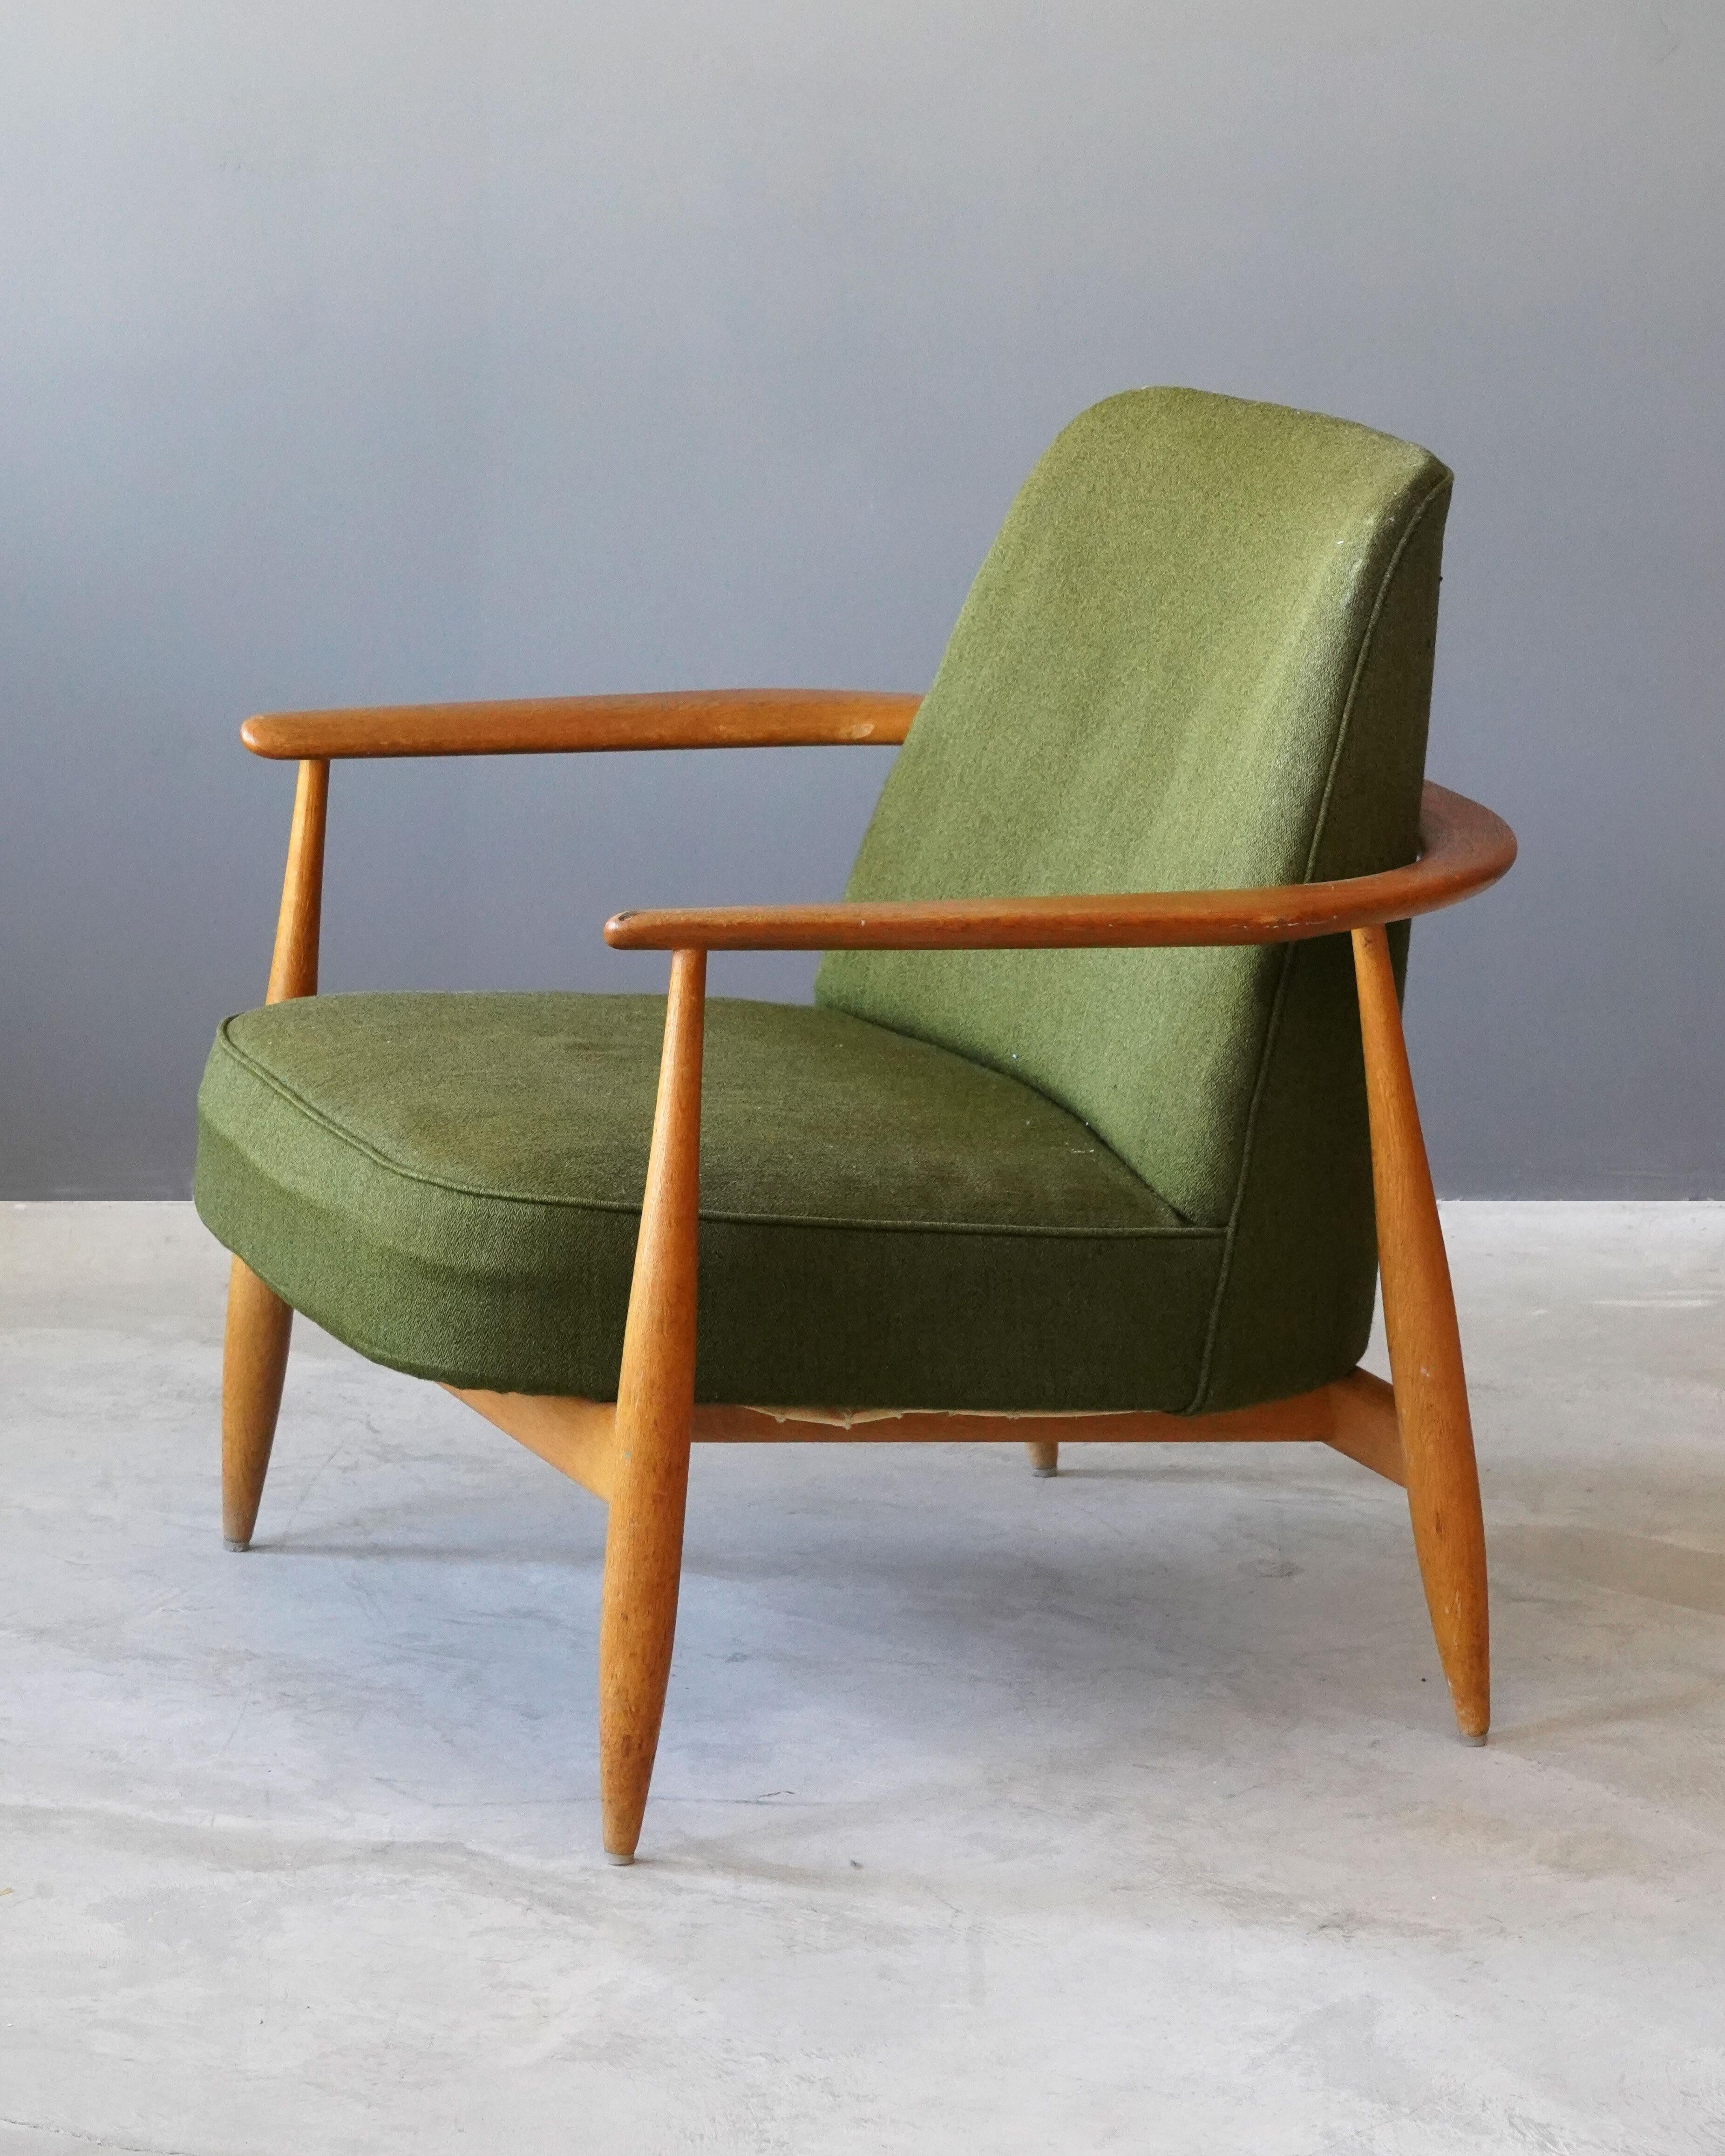 A lounge chair in finely turned oak. Designed and produced in Sweden, 1950s. Vintage fabric.

Other designers working in similar style include Ib Kofod-Larsen, Arnold Madsen, Finn Juhl, and Arne Jacobsen.